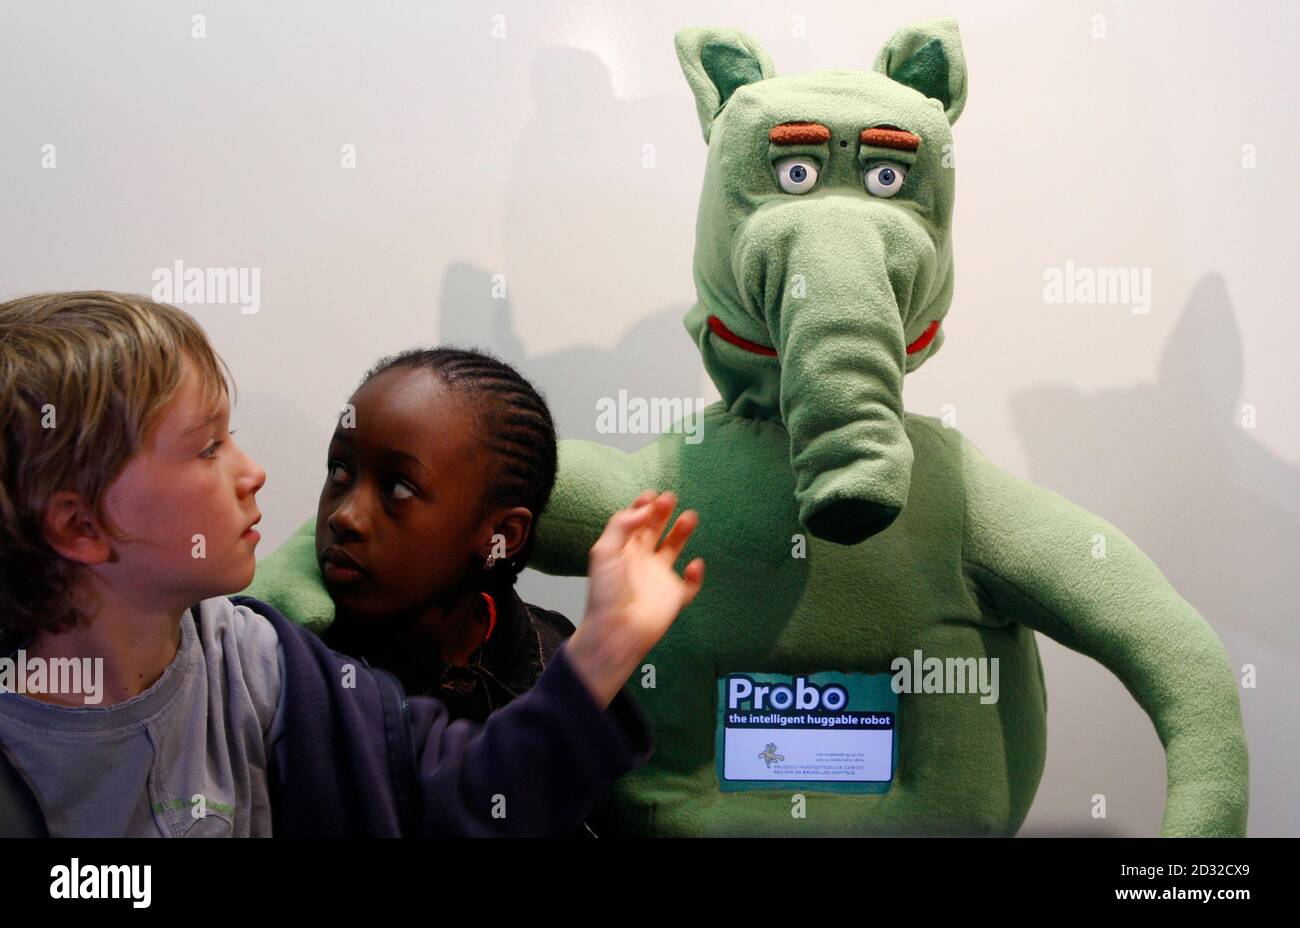 Children pose with Probo, the intelligent "huggable" robot, at the unveiling the first prototype April 21, 2009. Probo was designed to interact with humans and will in providing